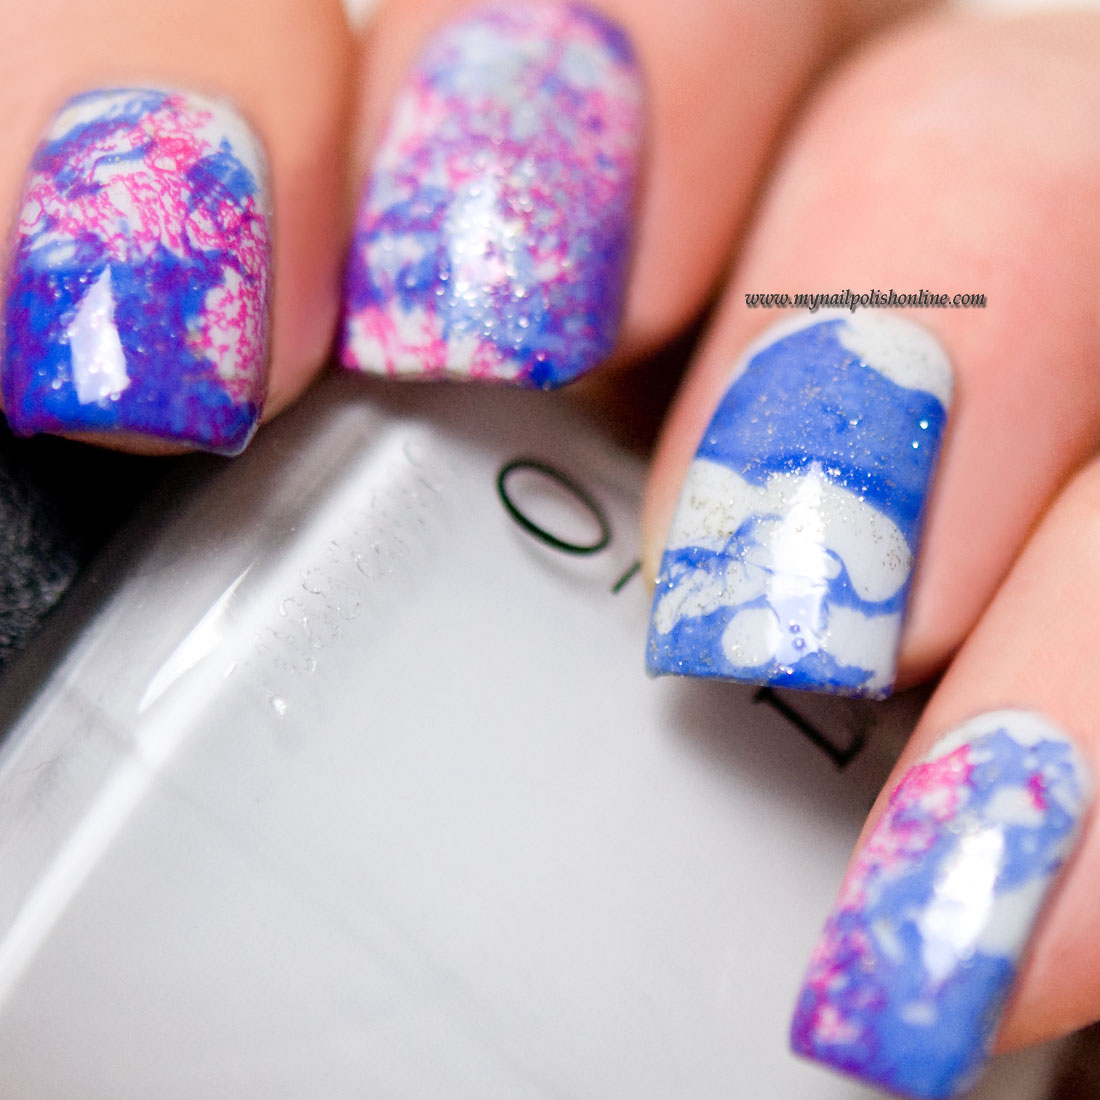 Nail Art - Triple water spotted manicure